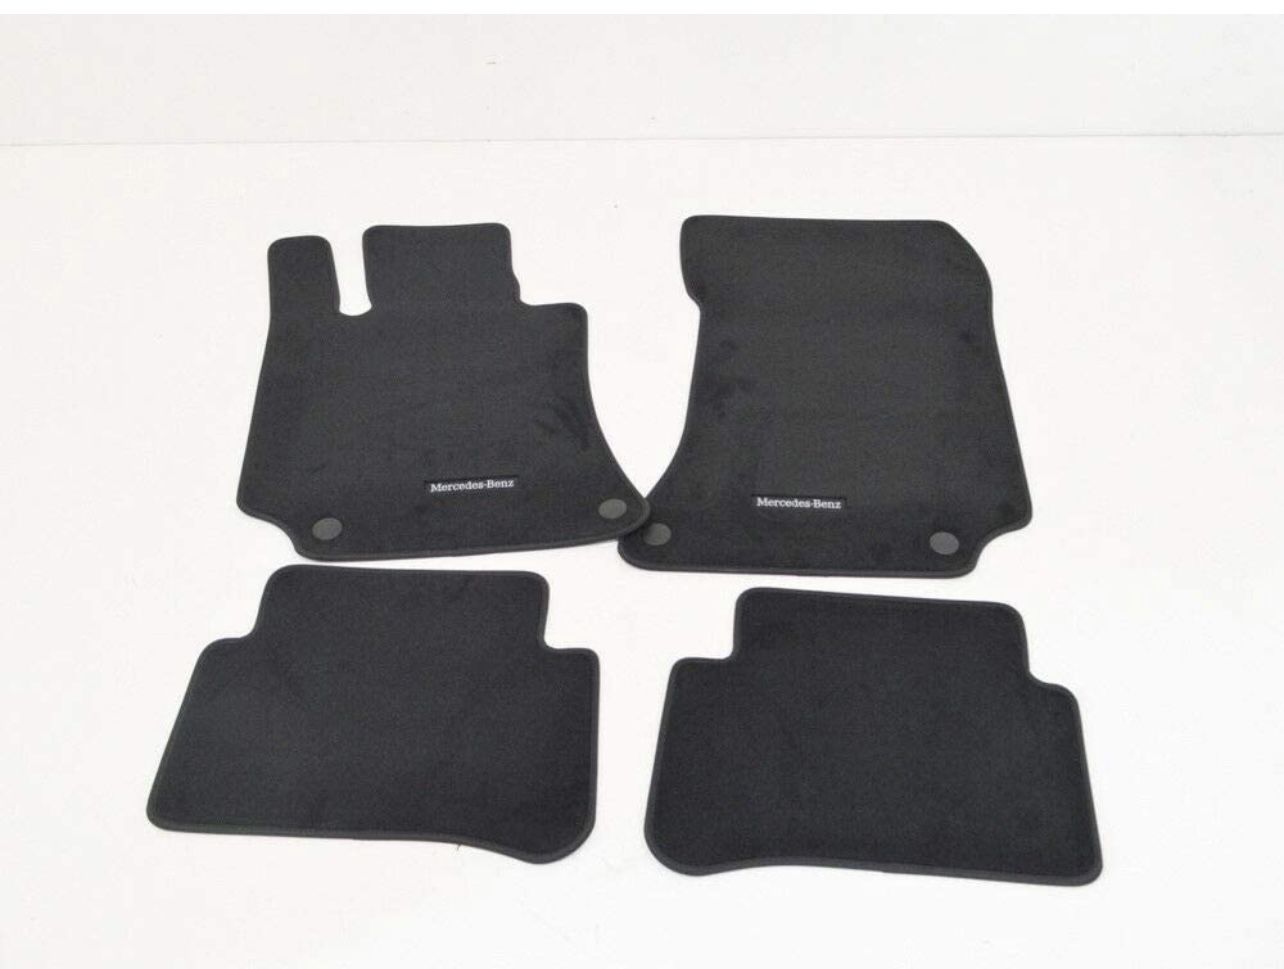 Compatible with mercedes-benz e w212 floor carpet mat set a(contact info removed)9j74 lhd 2017 new genuine